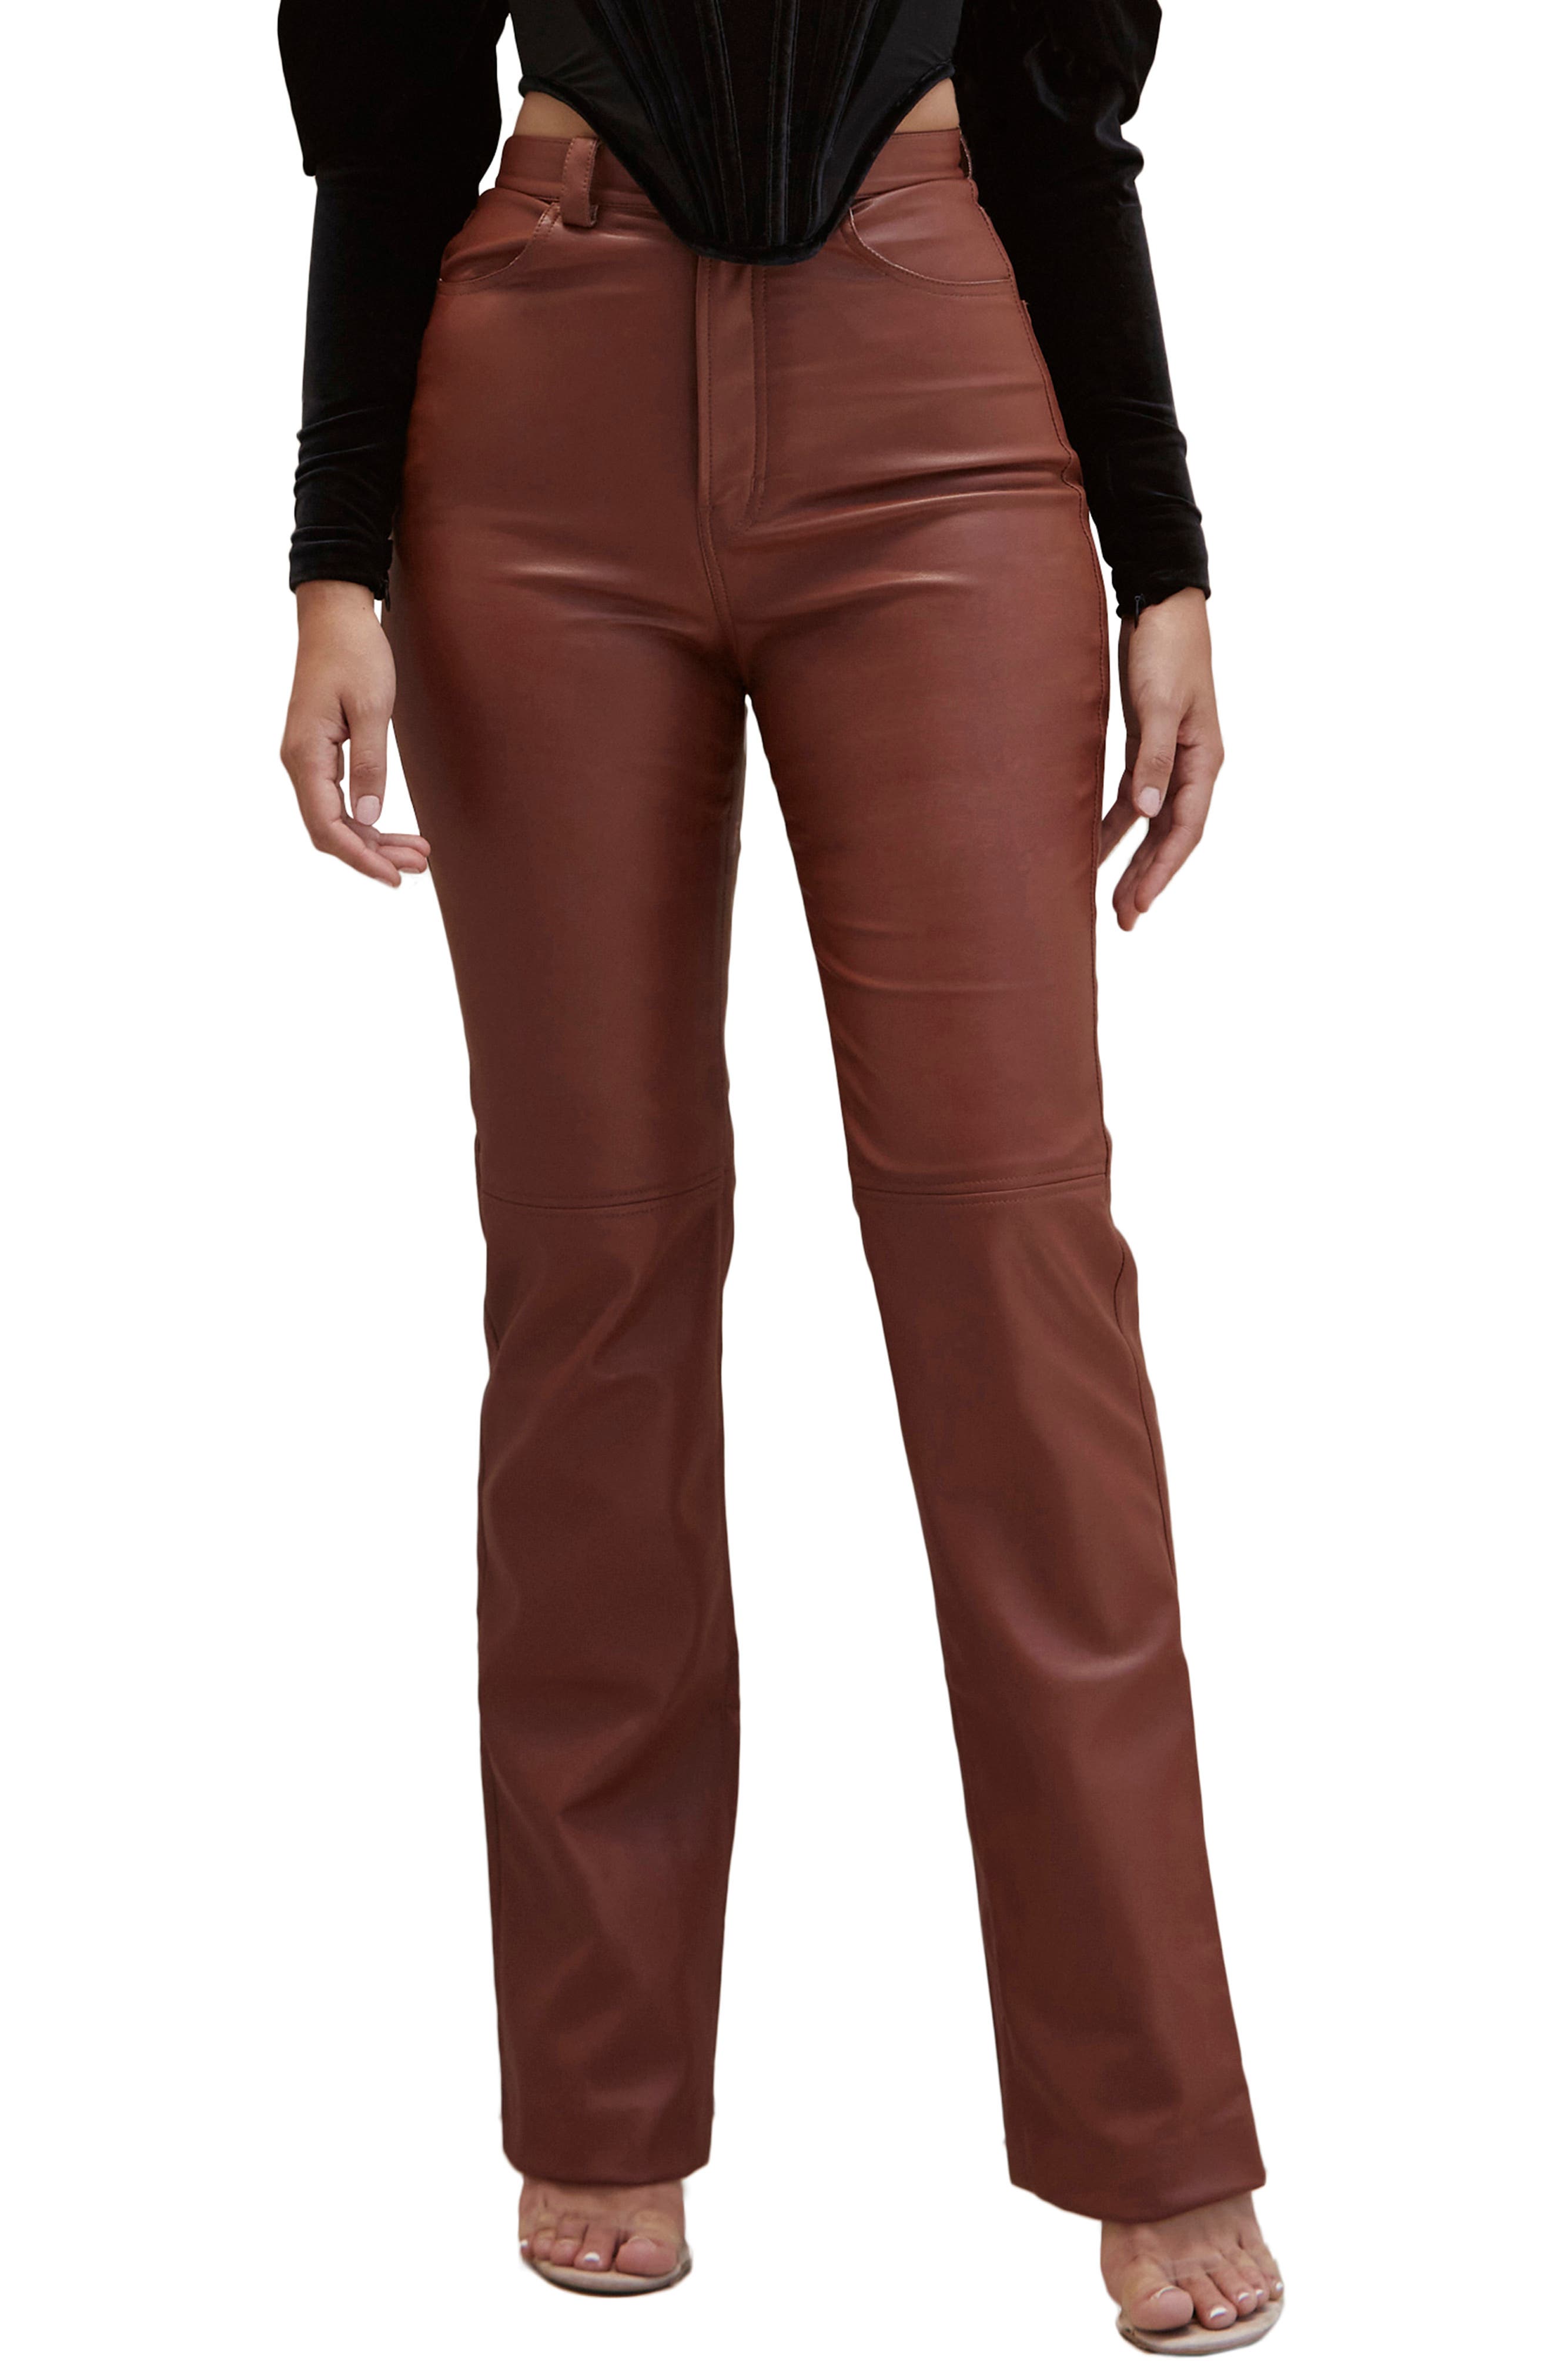 High Waisted Vegan Leather Trousers - Beige